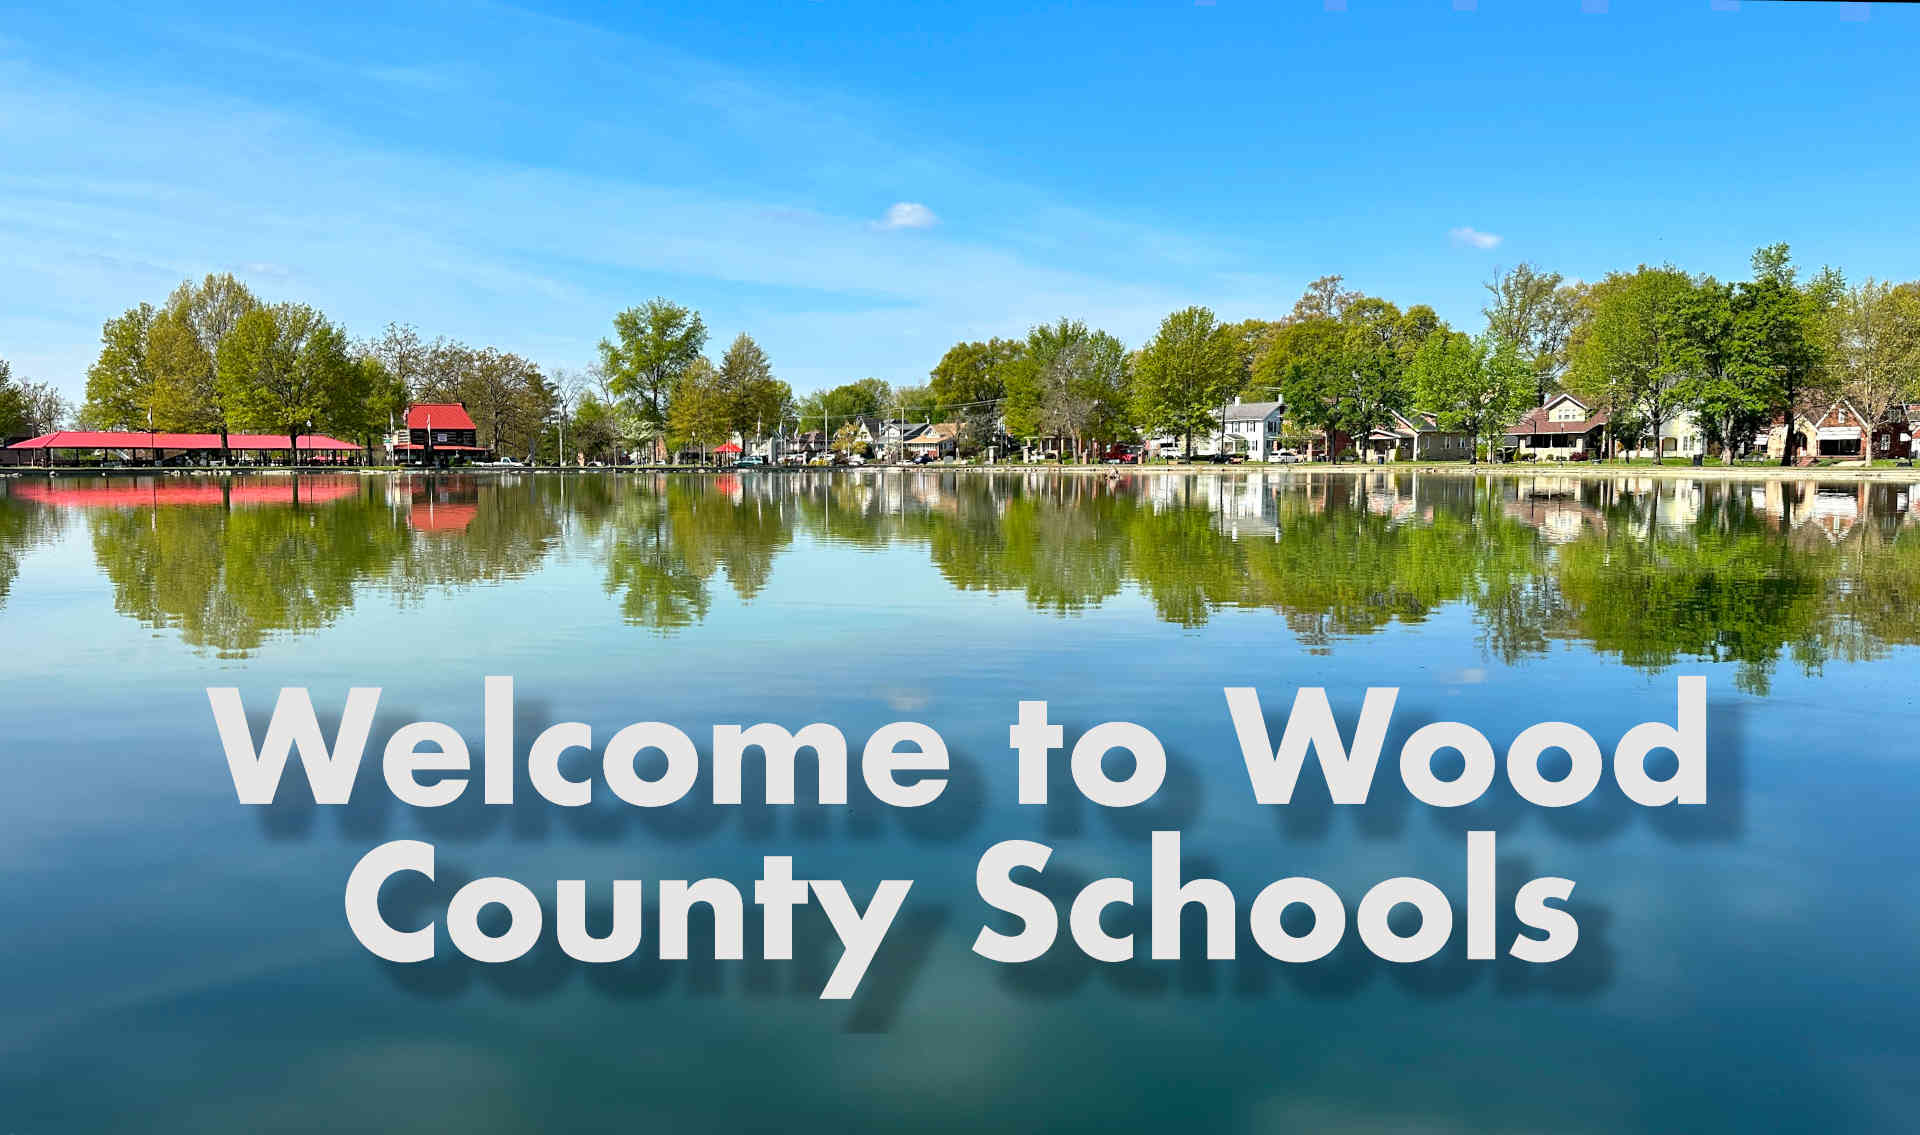 welcome to wood county schools image -- picture of city park with water in fore front and homes in the background